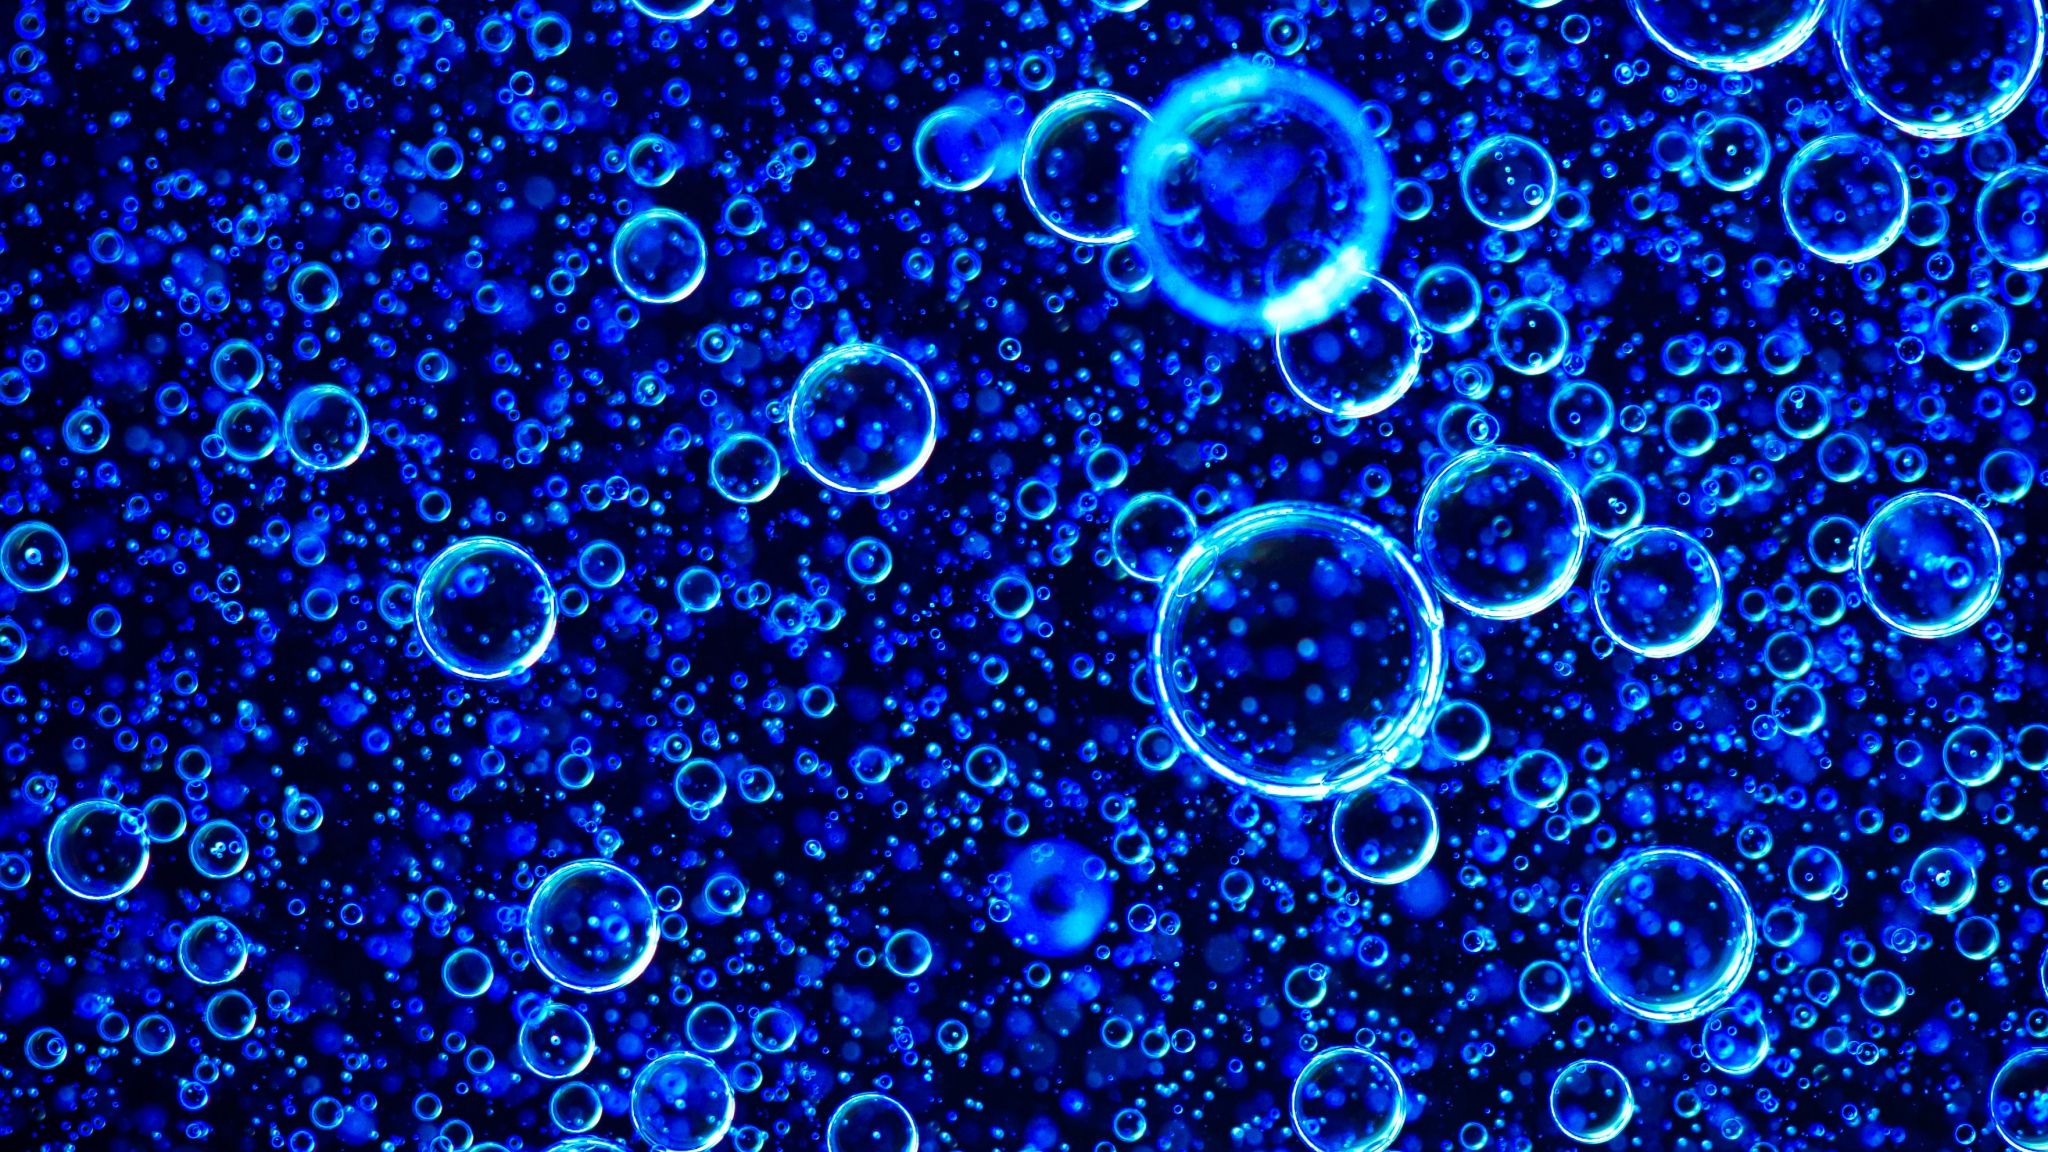 Download Blue bubbles, abstract wallpaper, 2048x Dual Wide, Widescreen